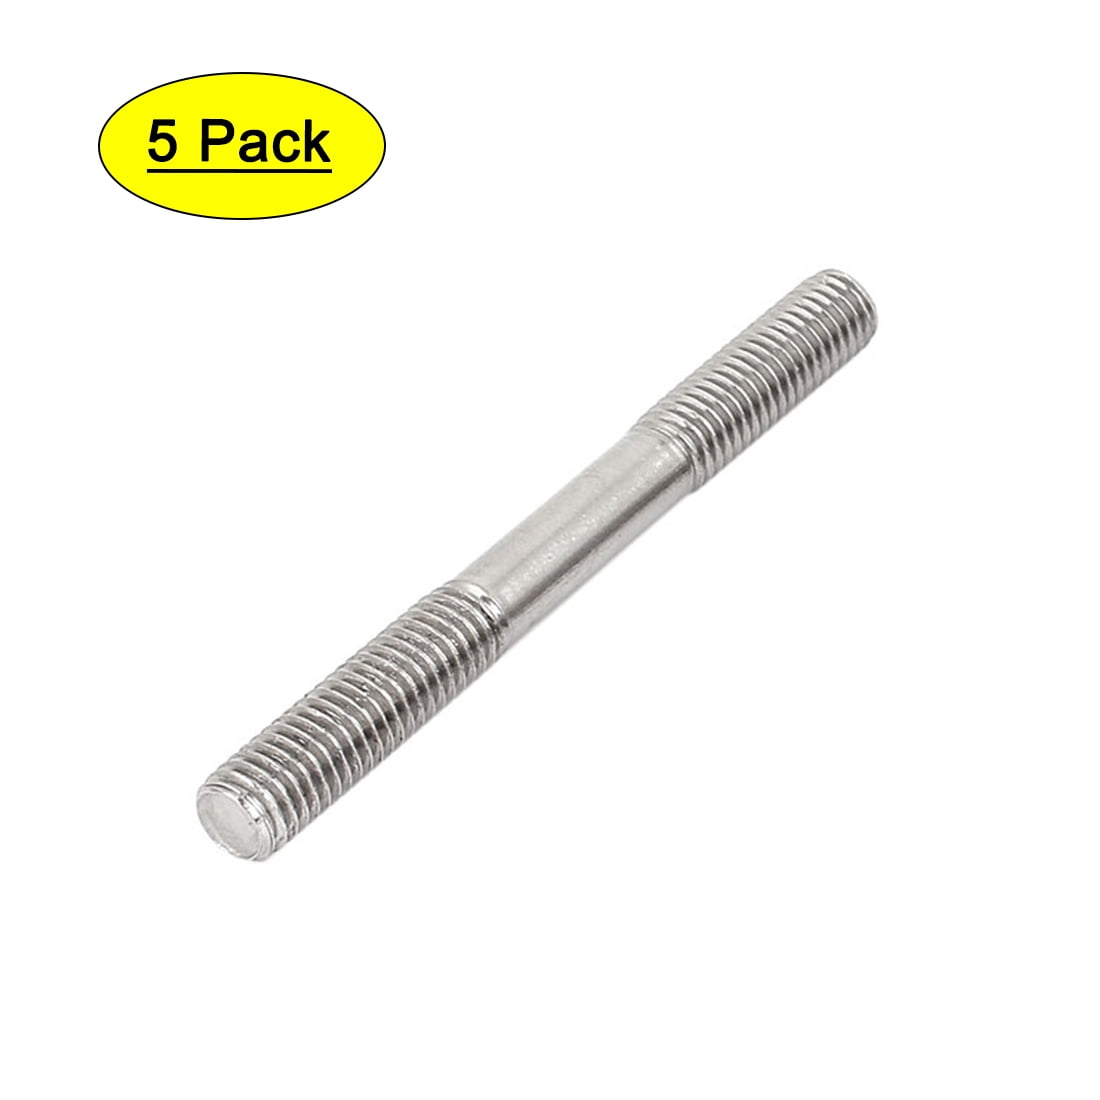 8mm M8 A2 304 Stainless Steel Double End Steel Threaded Stud Bolts Screws 